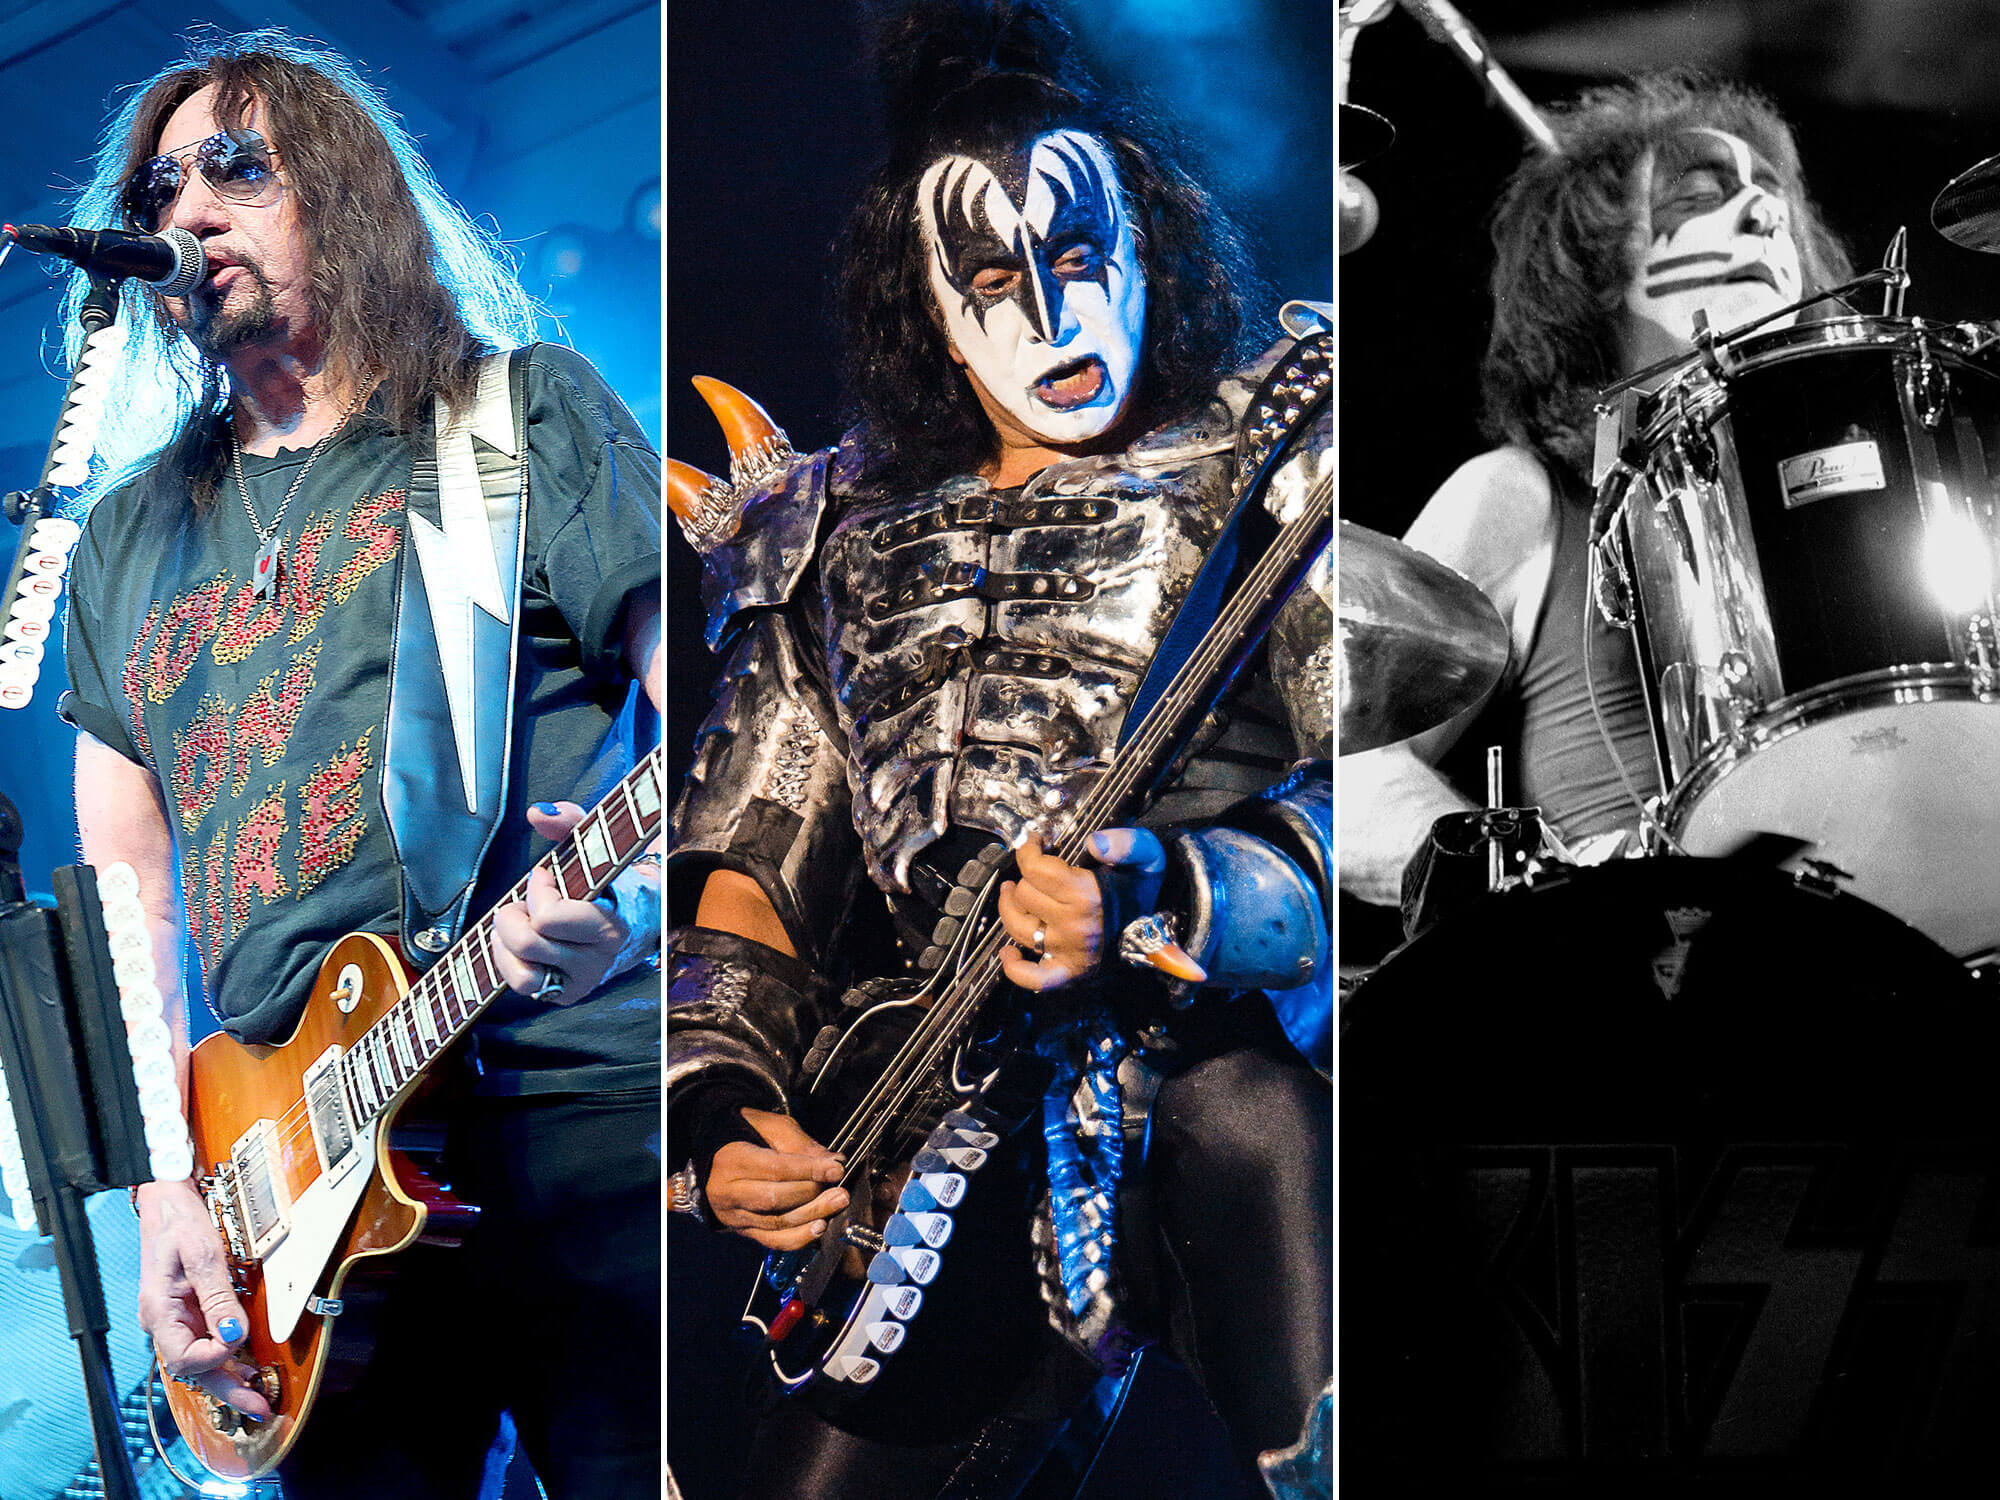 [L-R] Ace Frehley, Gene Simmons and Peter Criss performing live